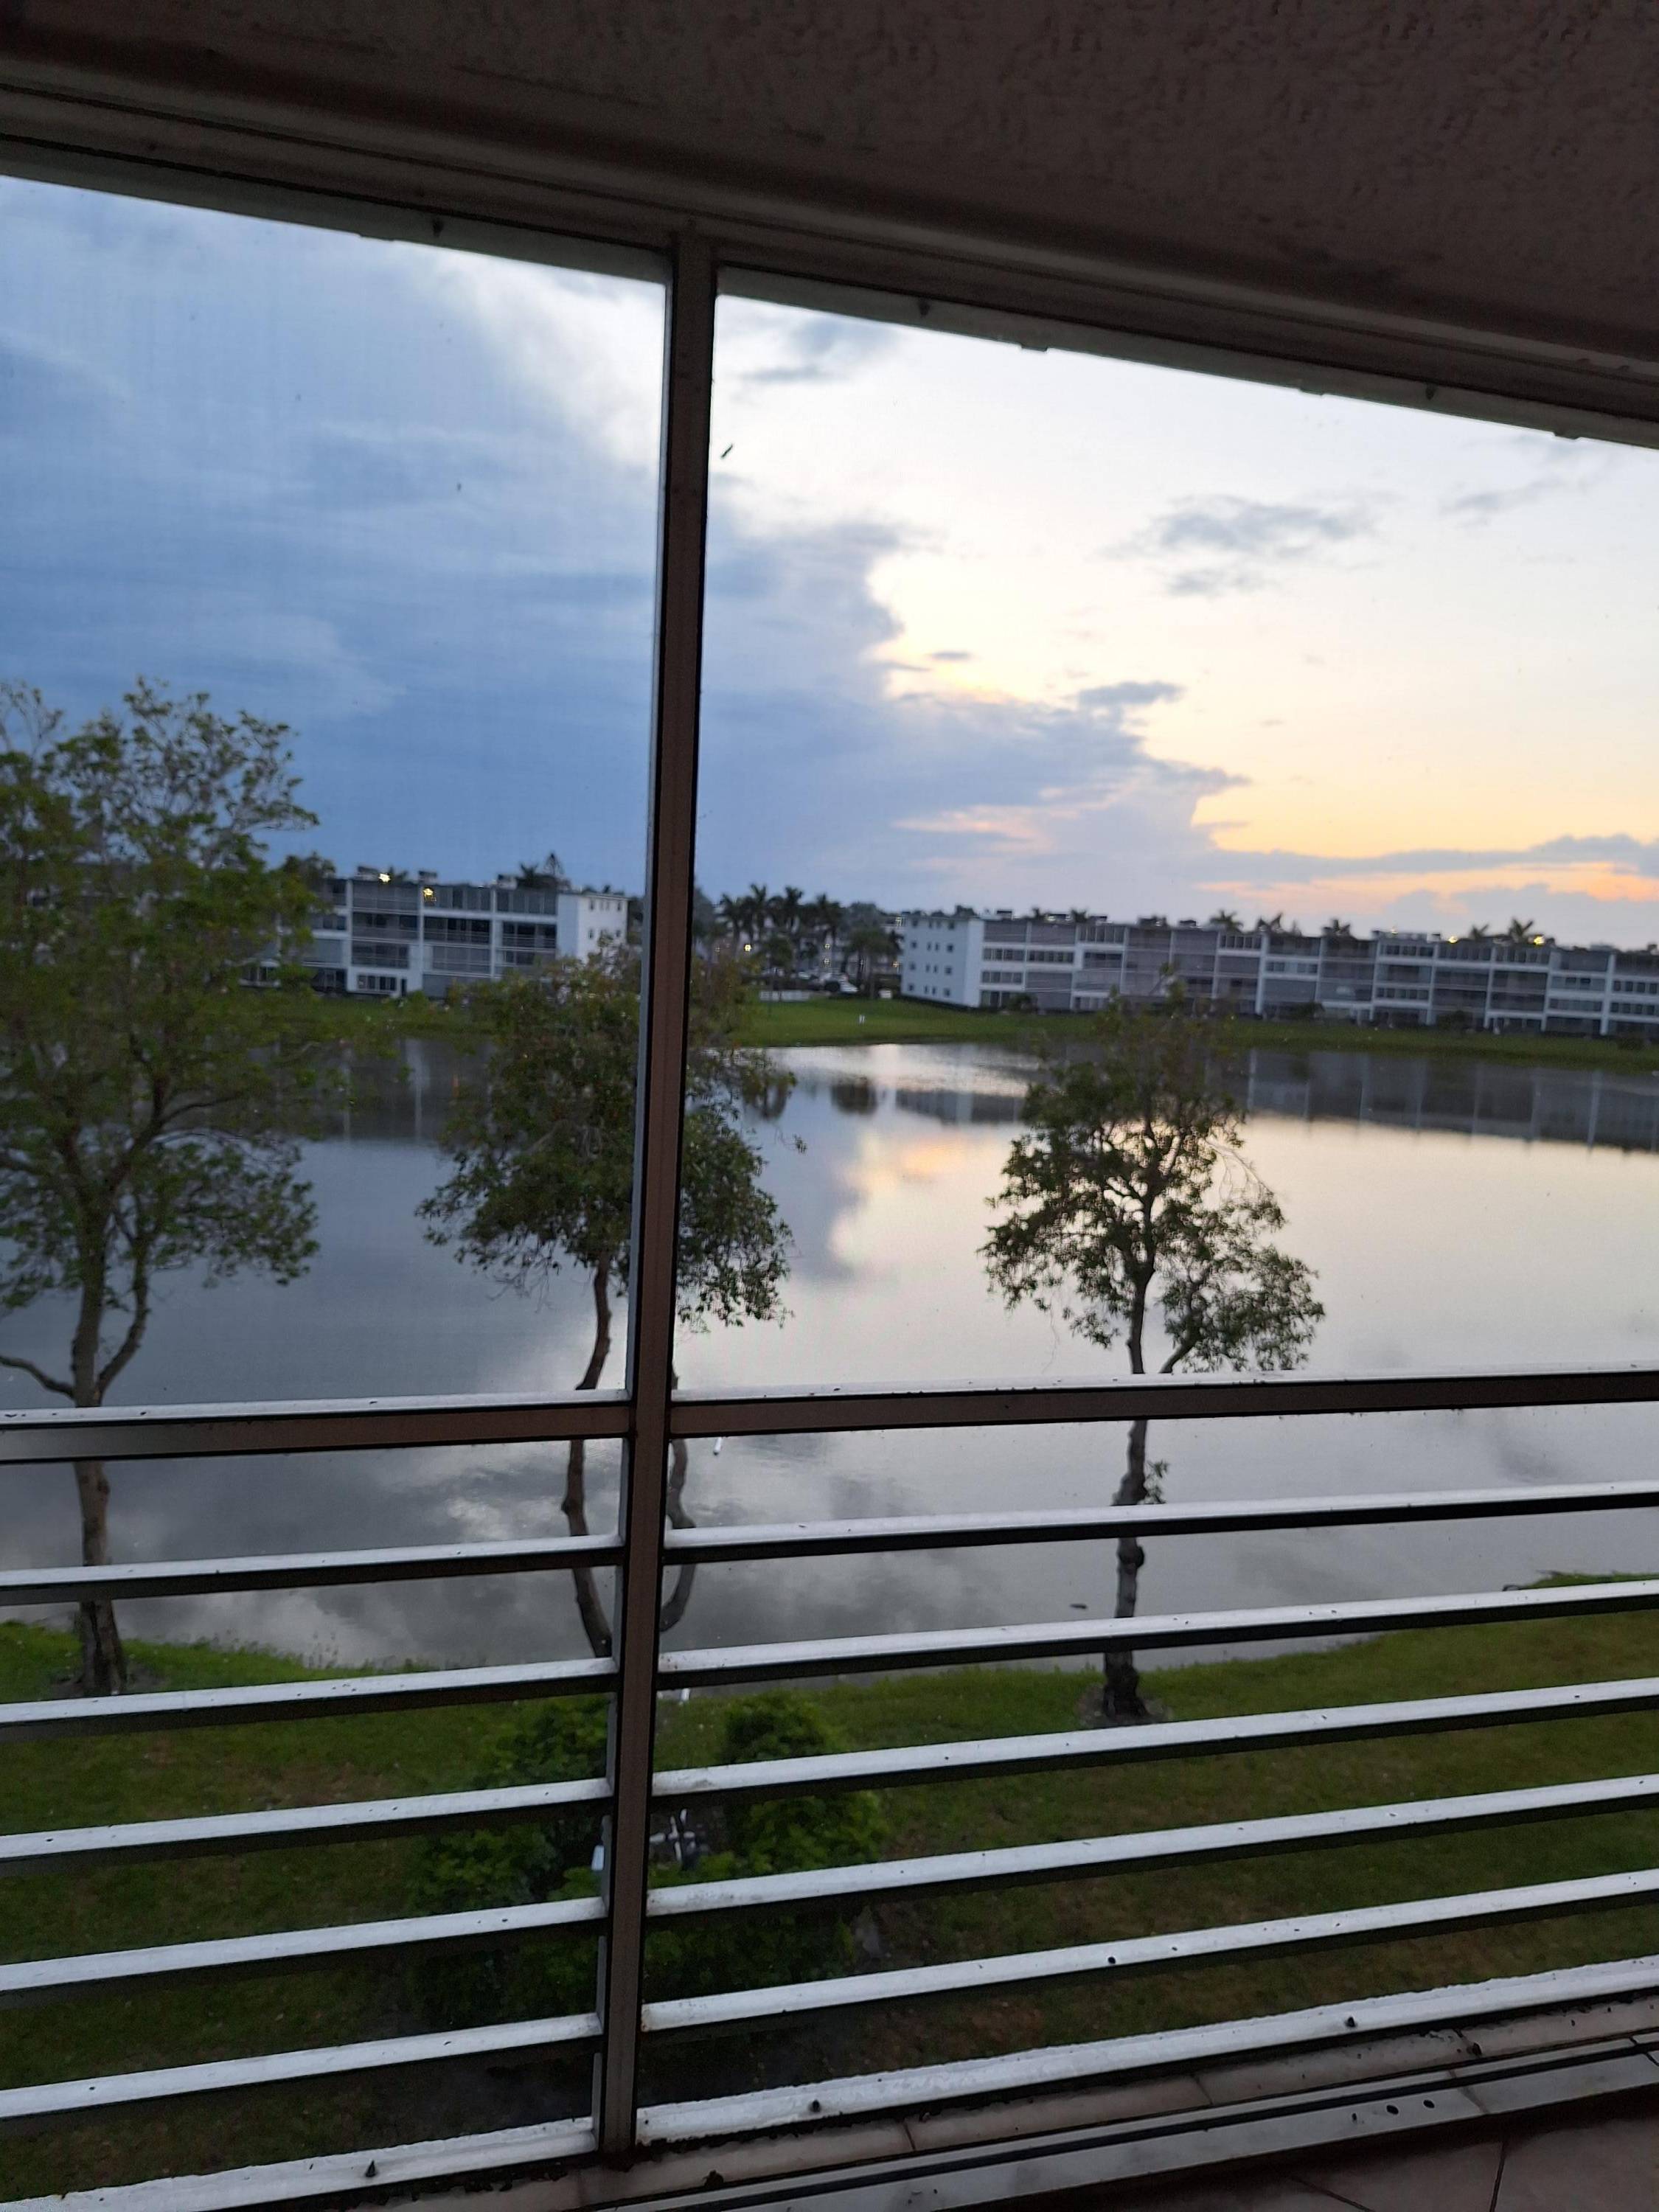 Century Village Boca Raton offers amazing lake views spacious outside patio, updated kitchen, tile throughout, this unit overlooks the endless lake view.